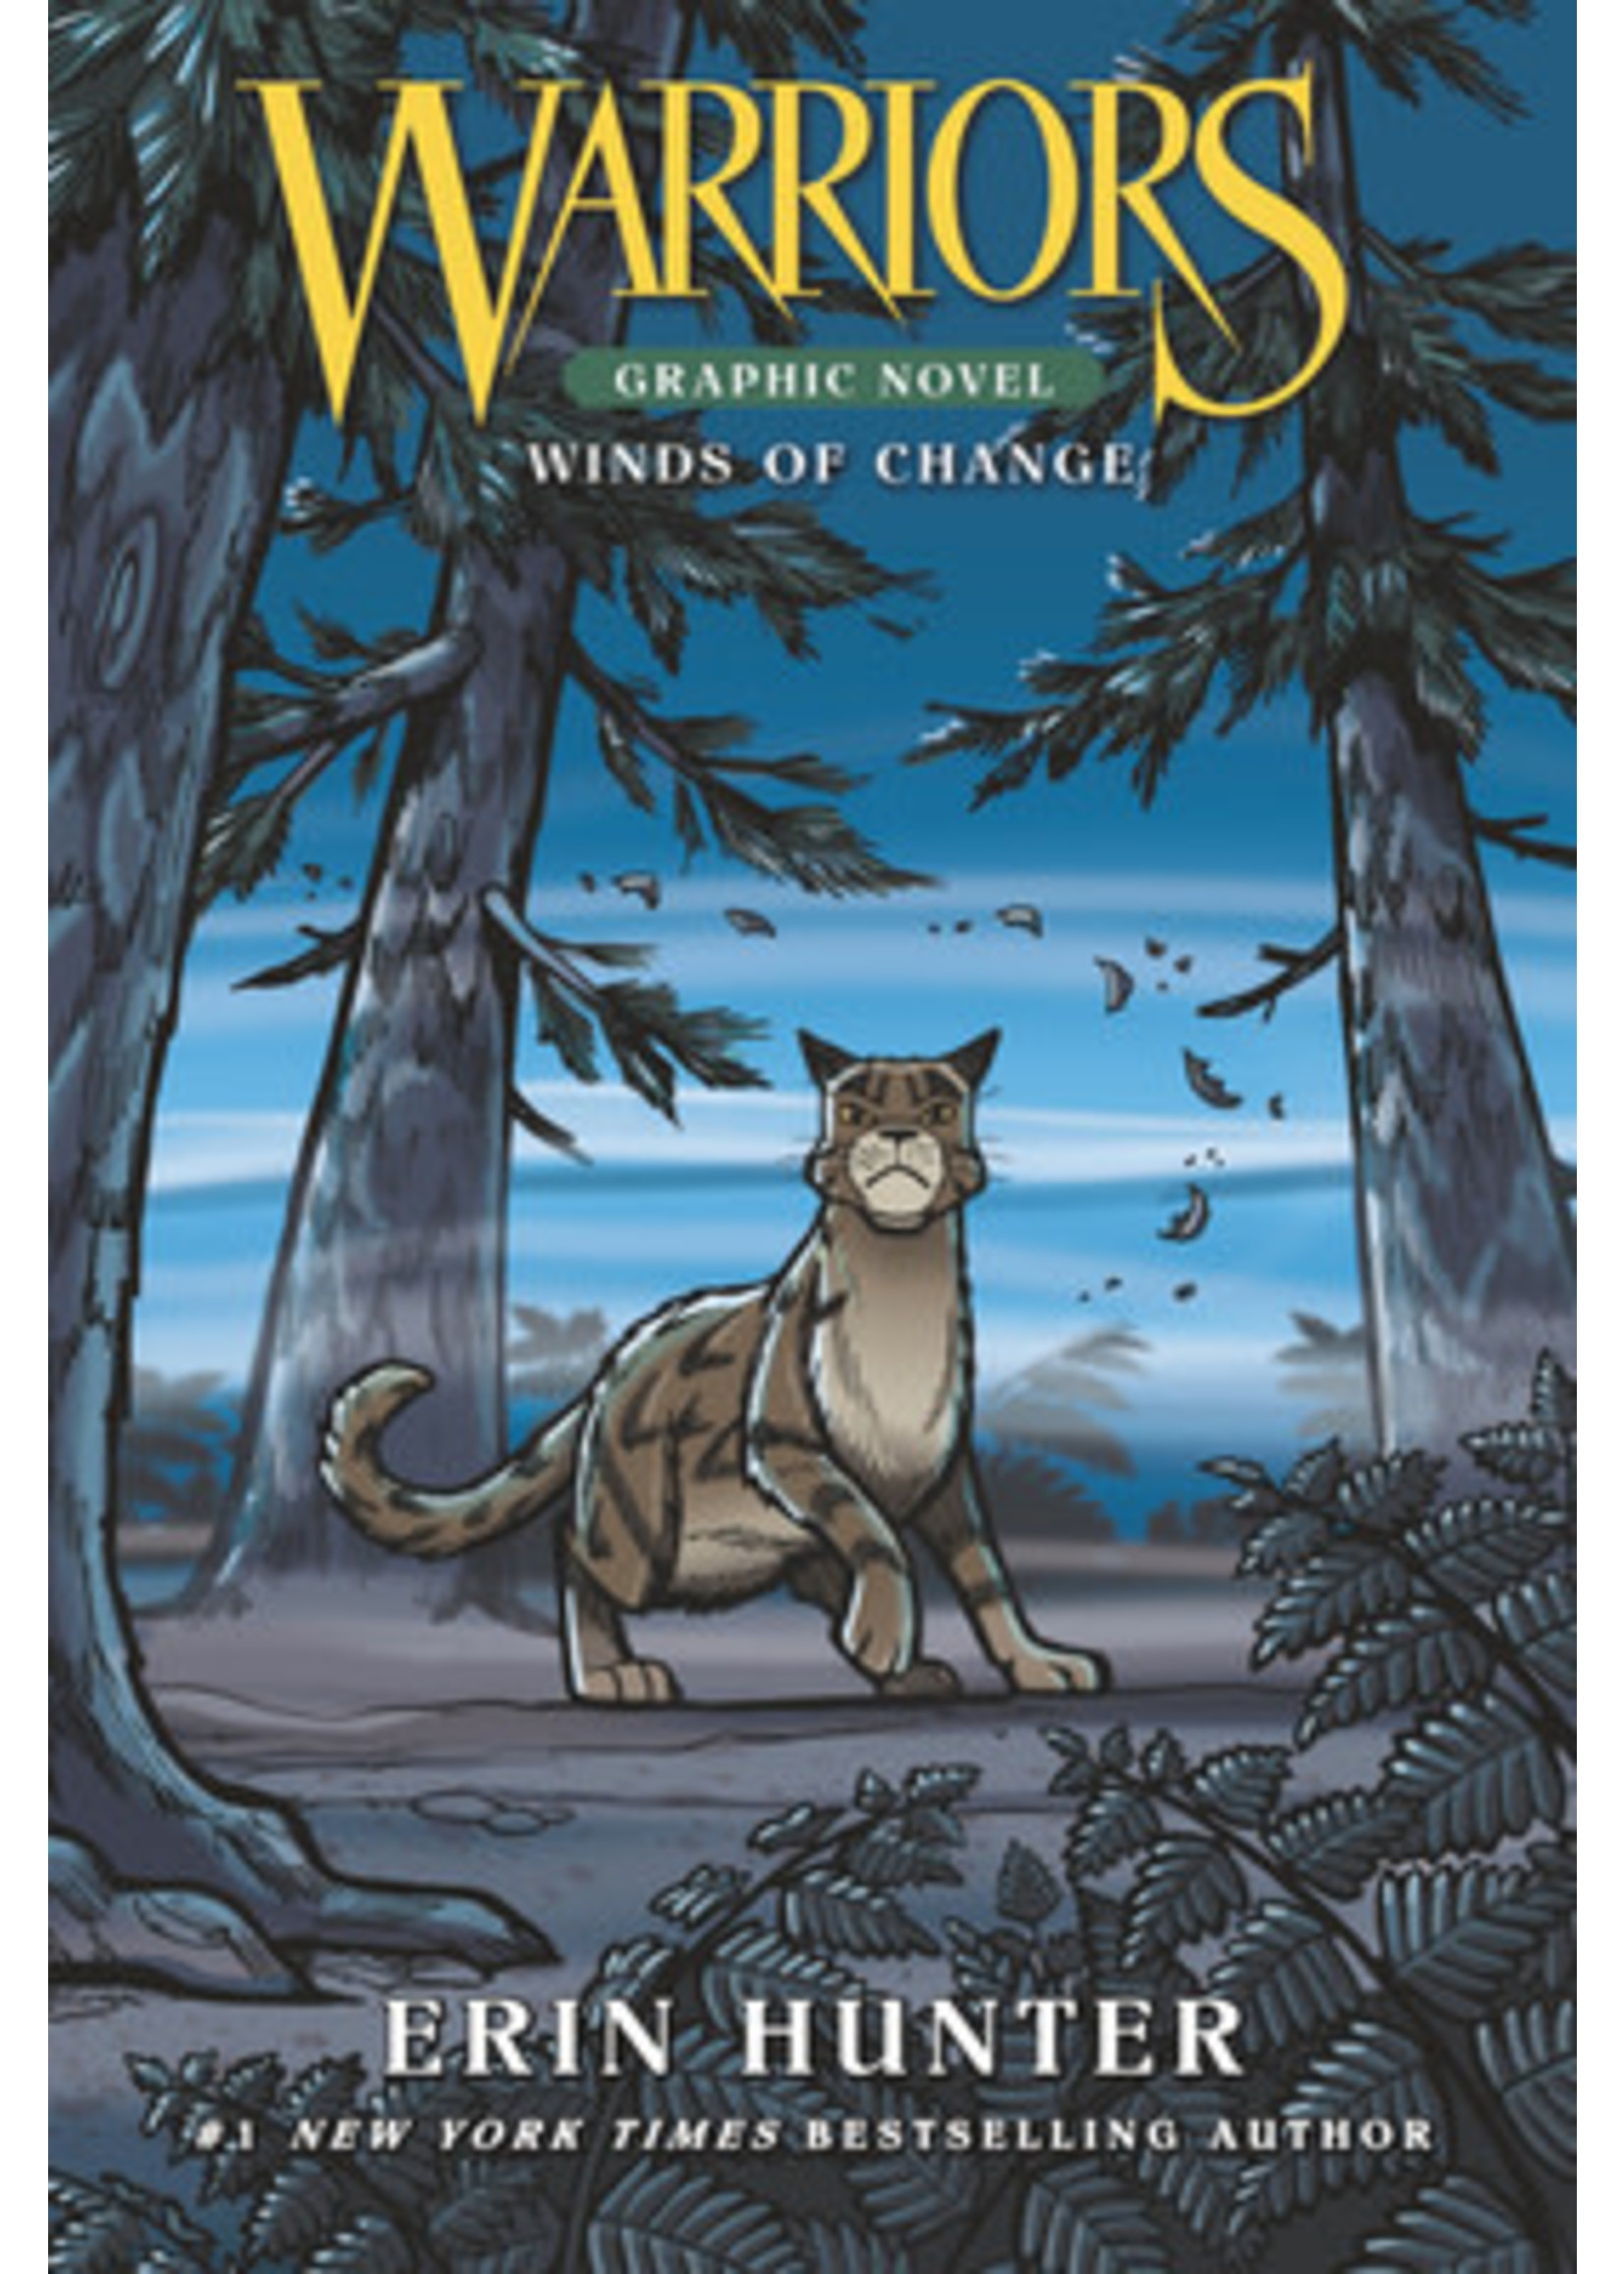 Winds of Change by Erin Hunter